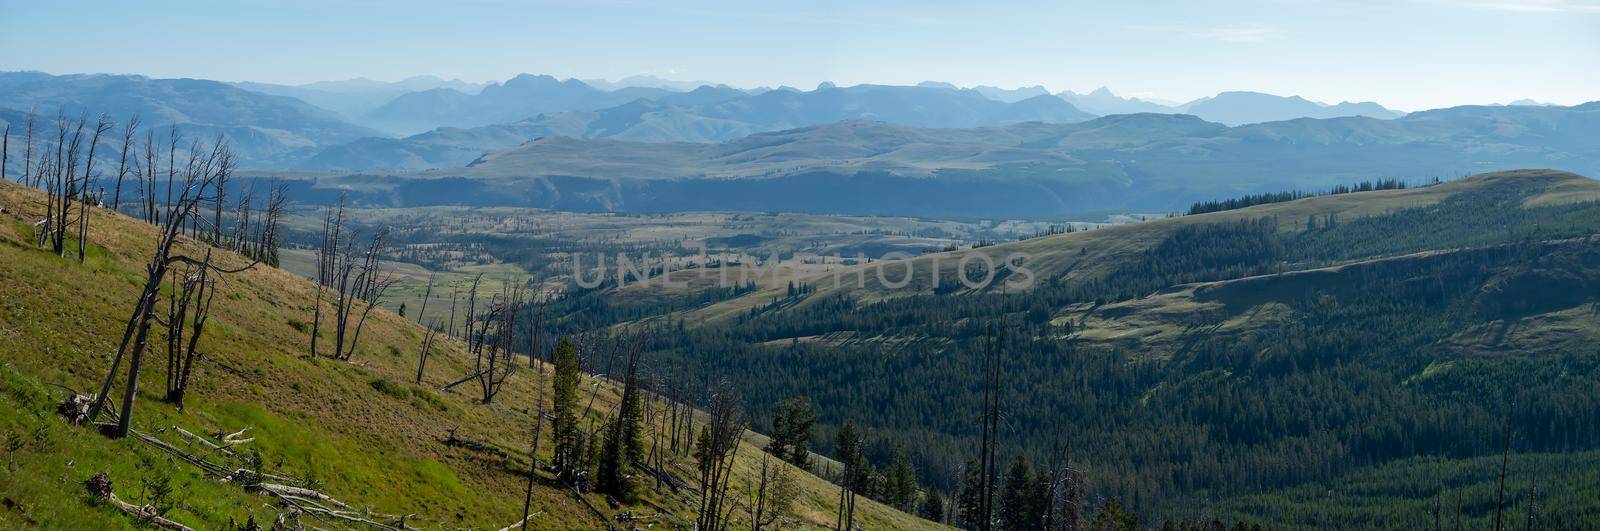 scenery at Mt Washburn trail in Yellowstone National Park, Wyoming, USA by digidreamgrafix